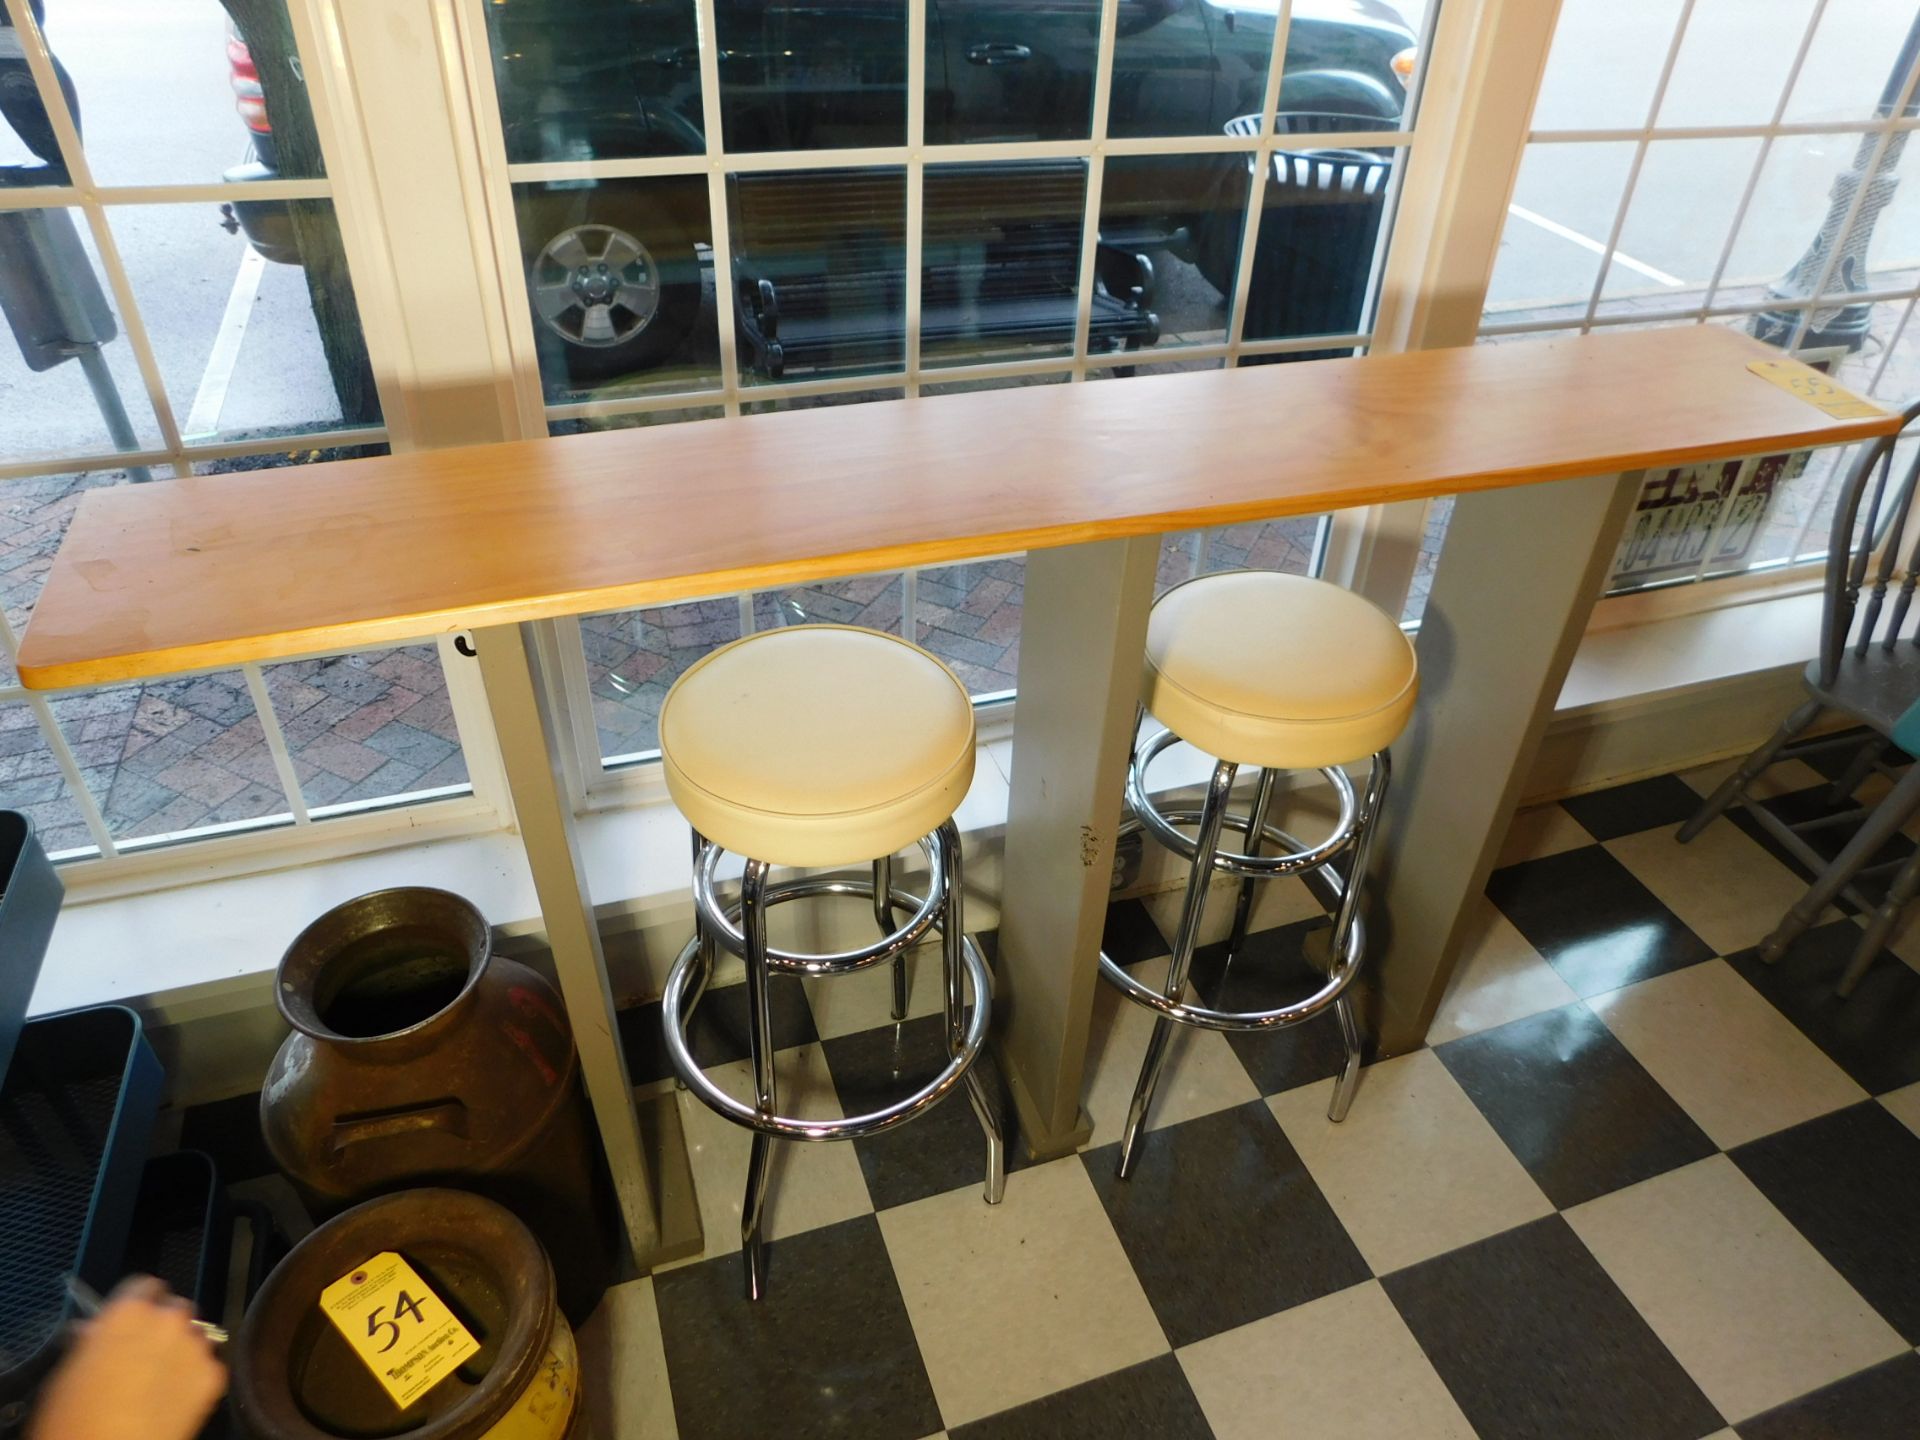 Wooden Tall Table with Bar Stools, 5' L x 1' W x 42" T